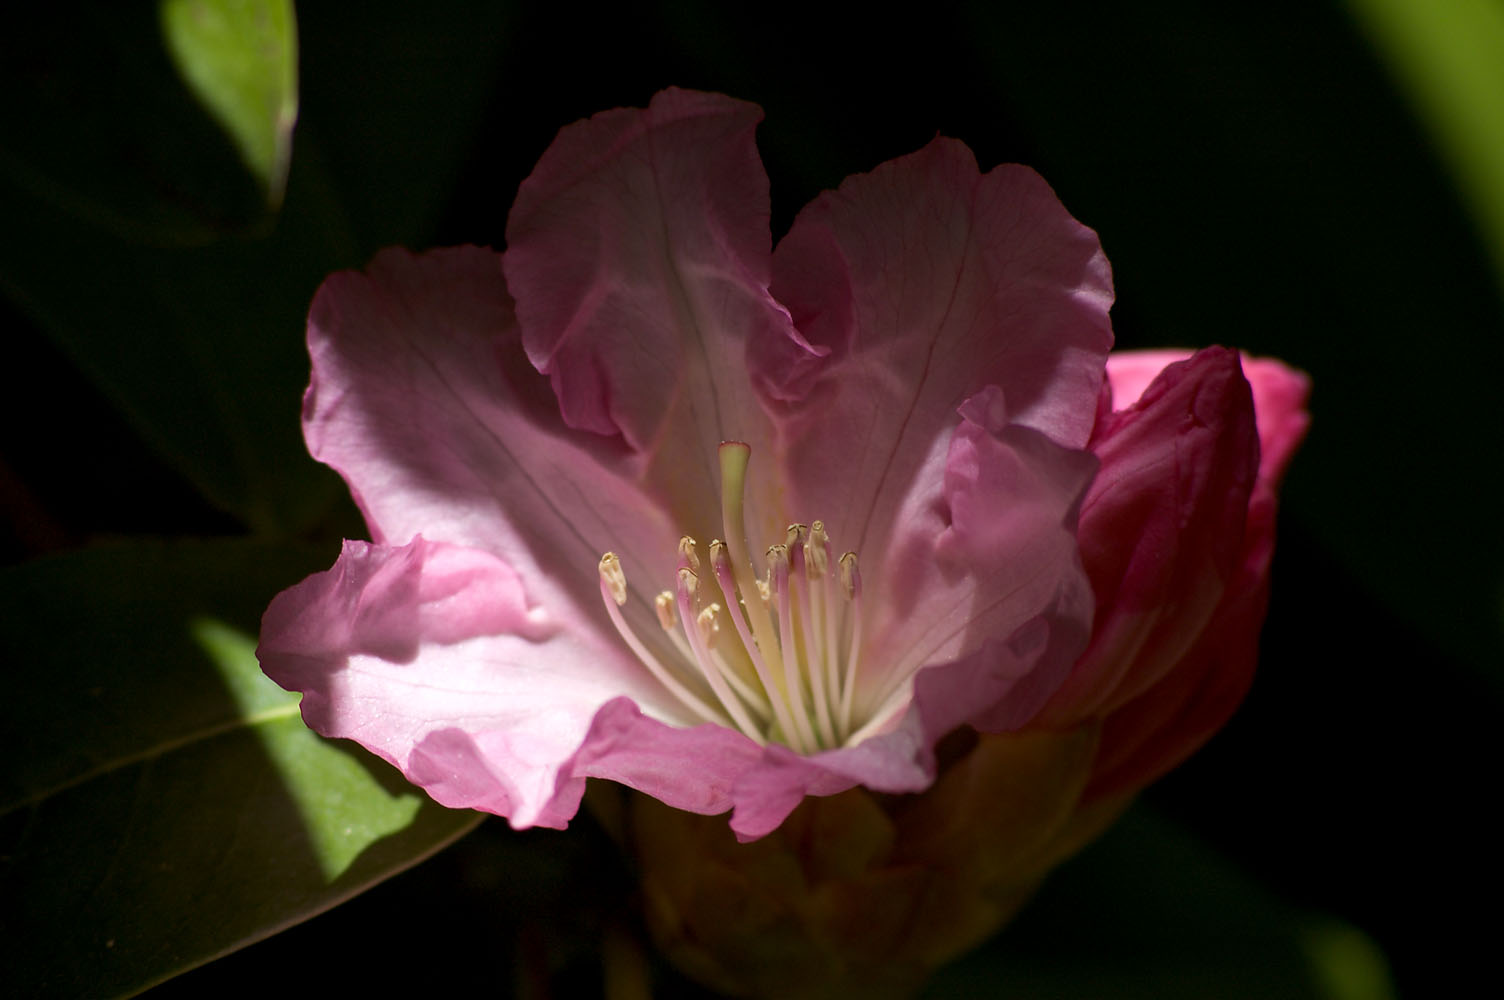 rhododendron (large)